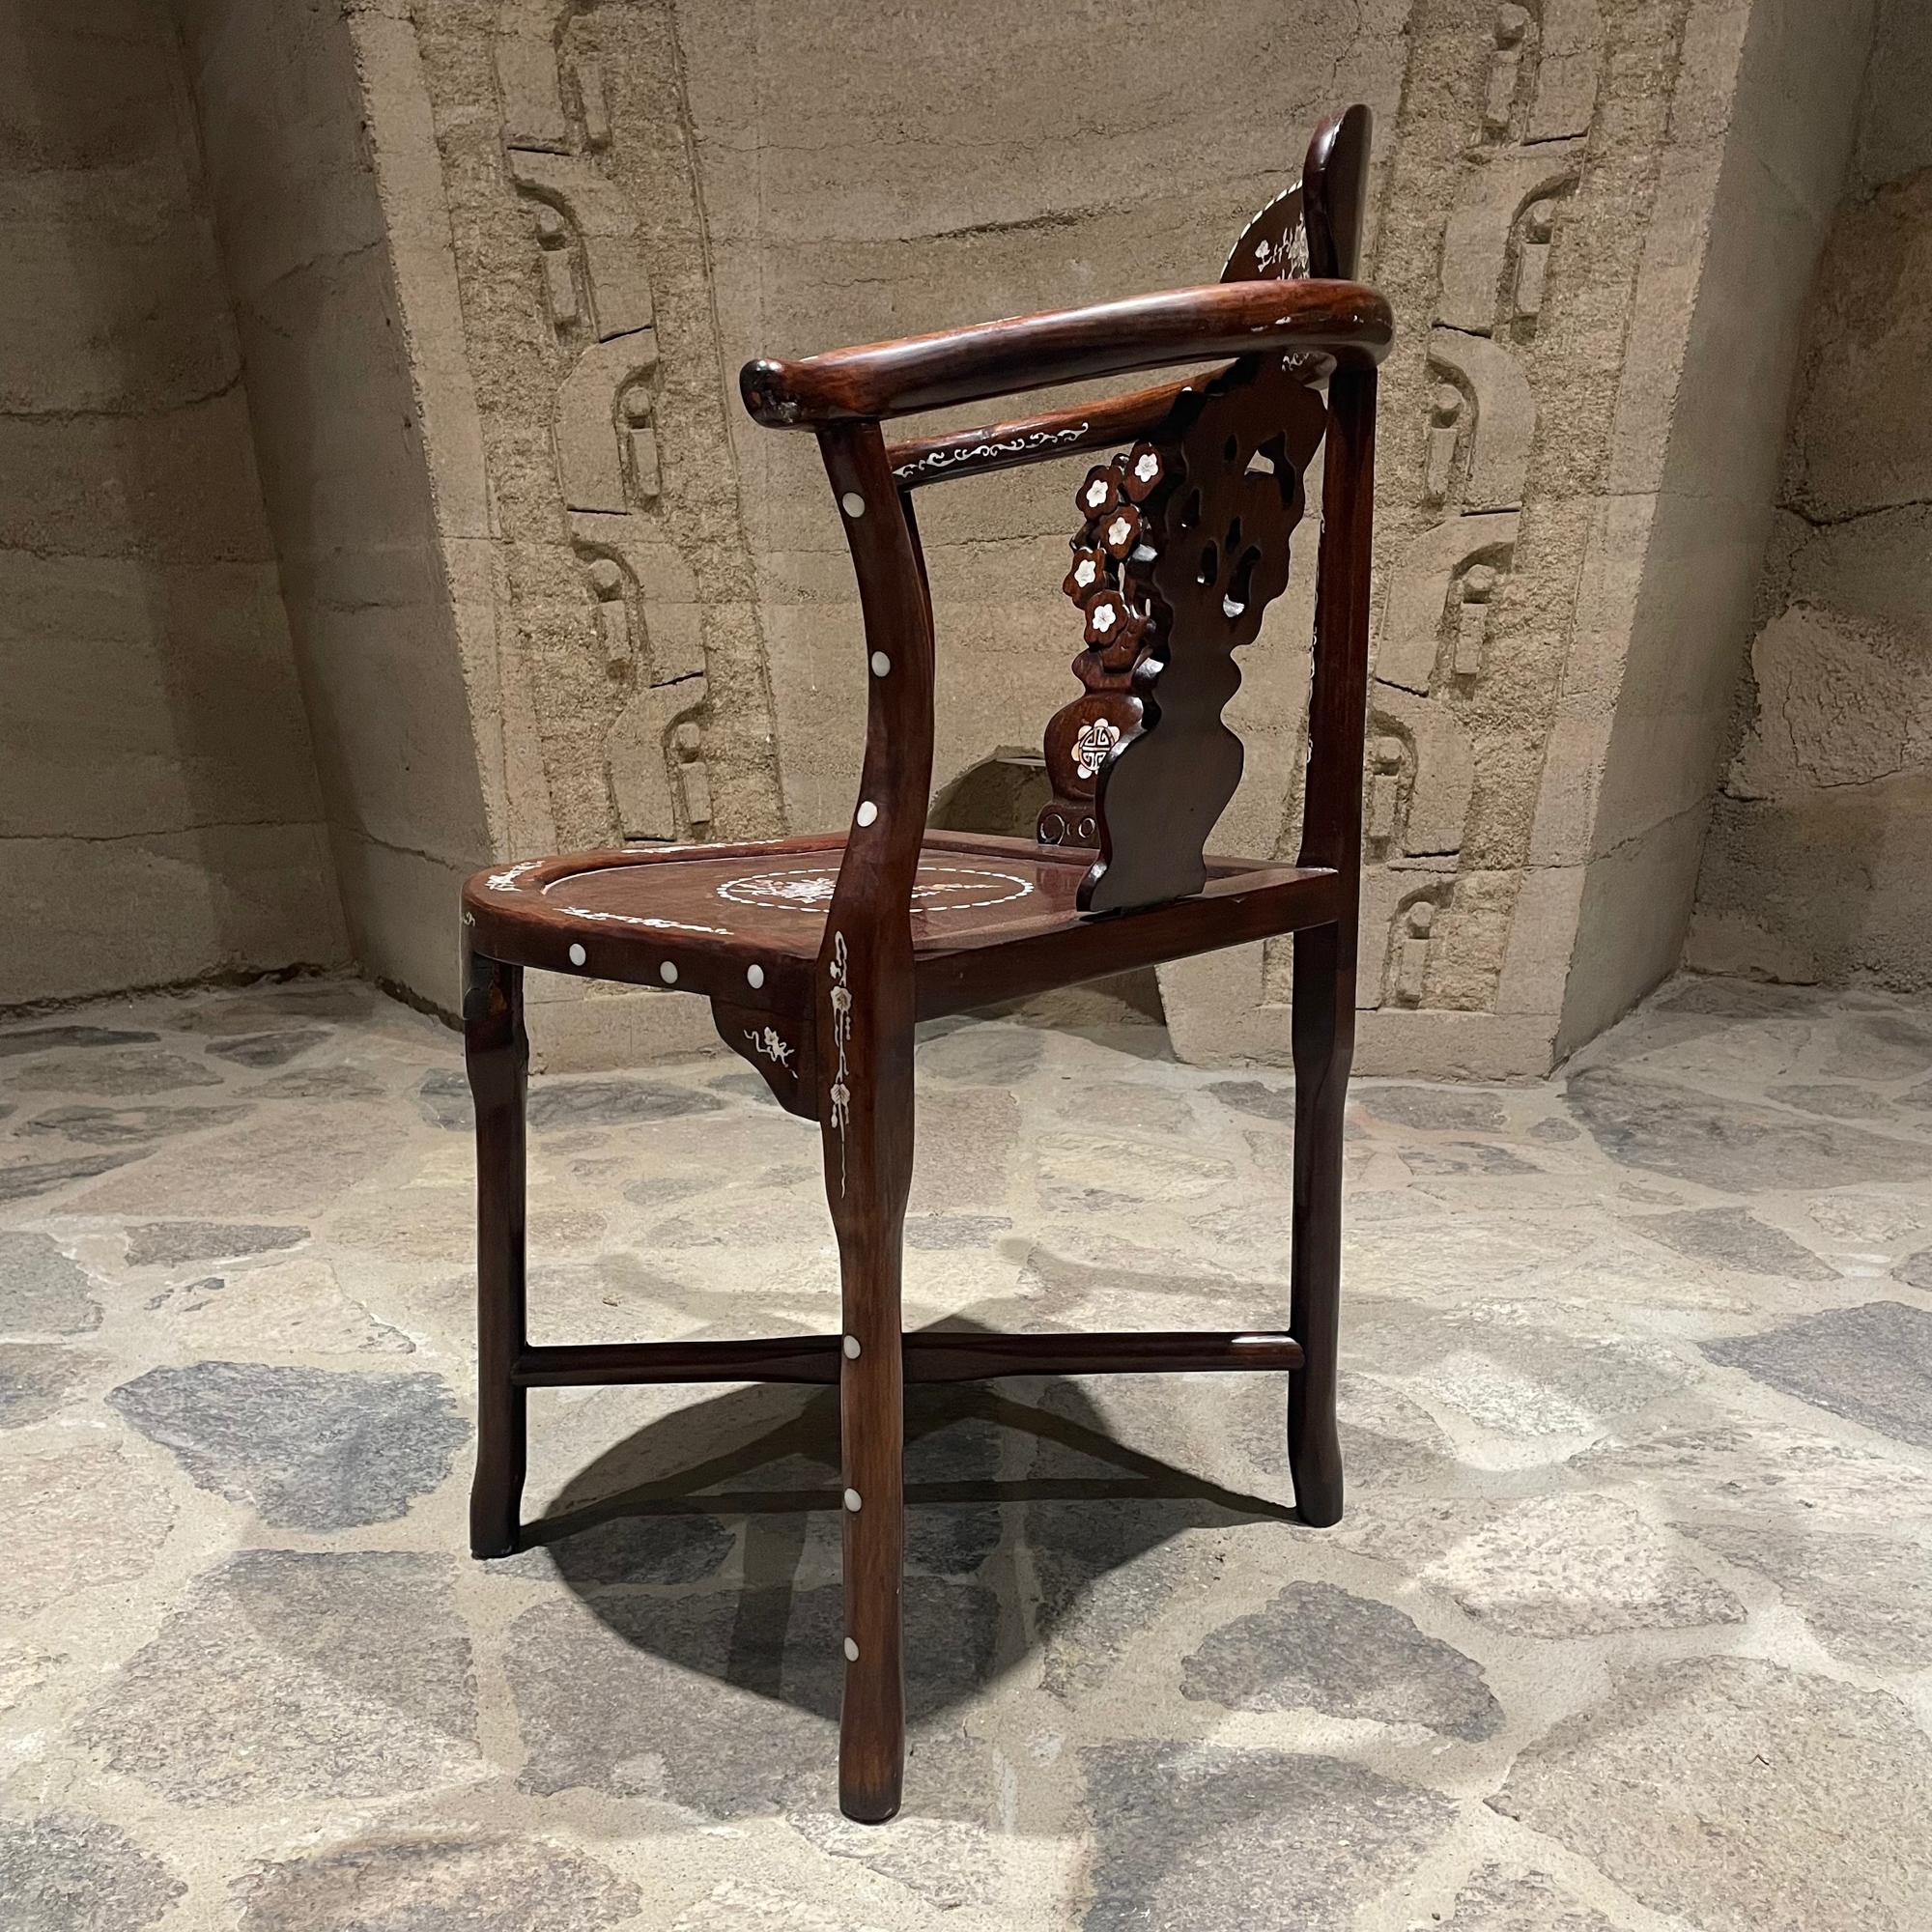 Side chair
Chinese solid rosewood corner angle side armchair with carved mother of pearl ornamentation inlay.
No label.
32.75 x 27 w 21 d Seat h 16.5 inches
Original Unrestored Preowned Condition. Light stain on top seat. Sun faded. Presents firm